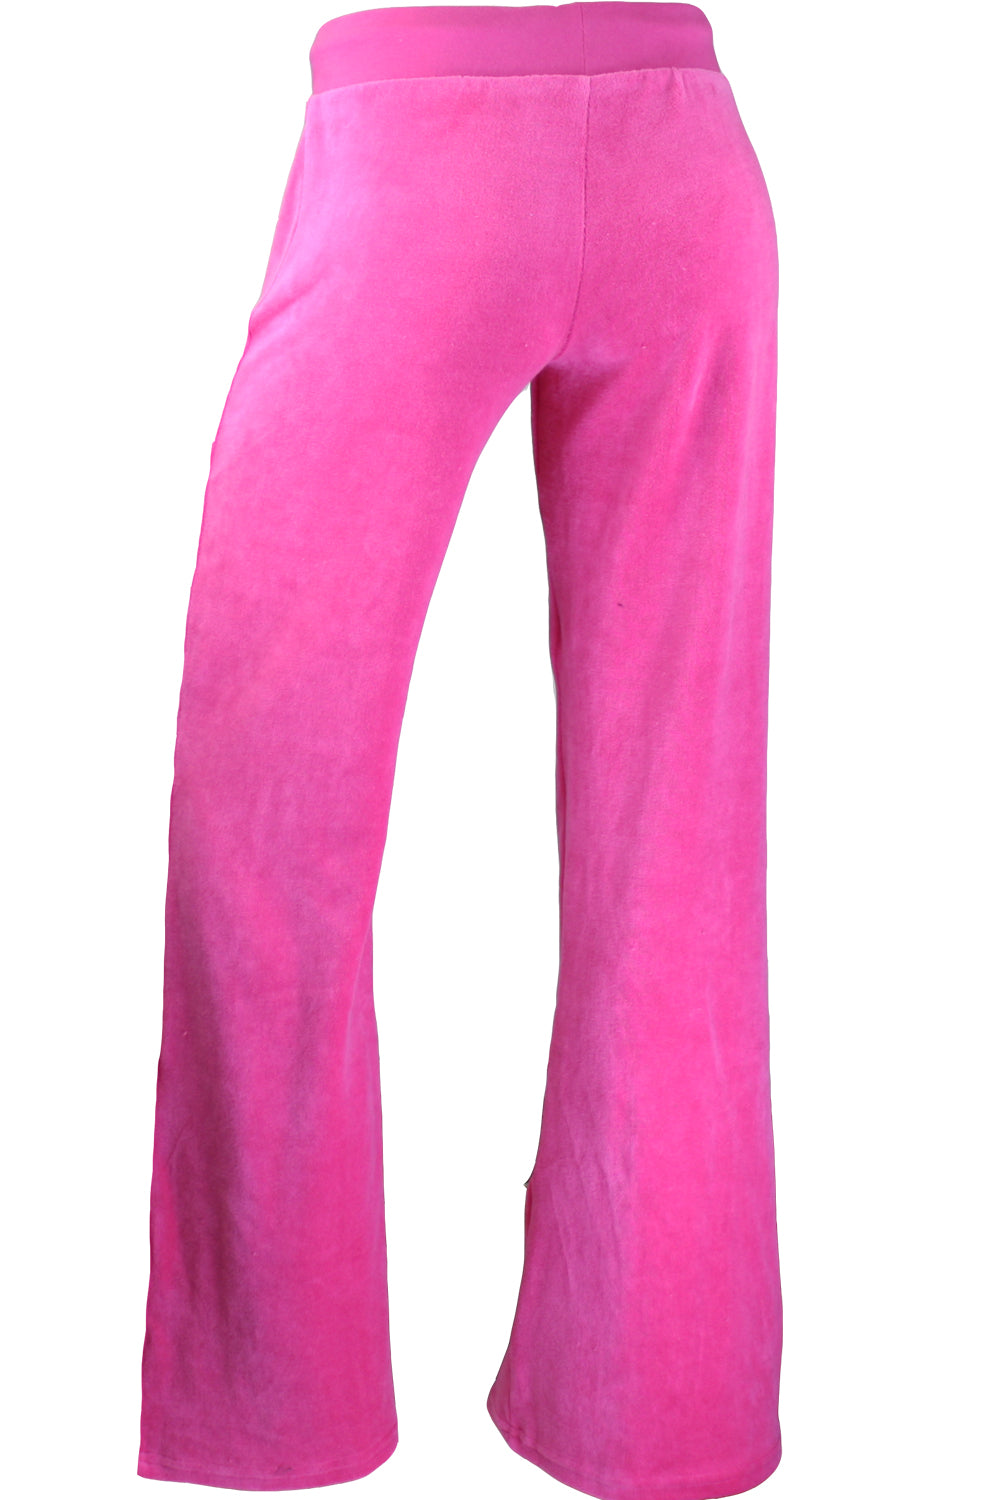 pink pants party - calivintage